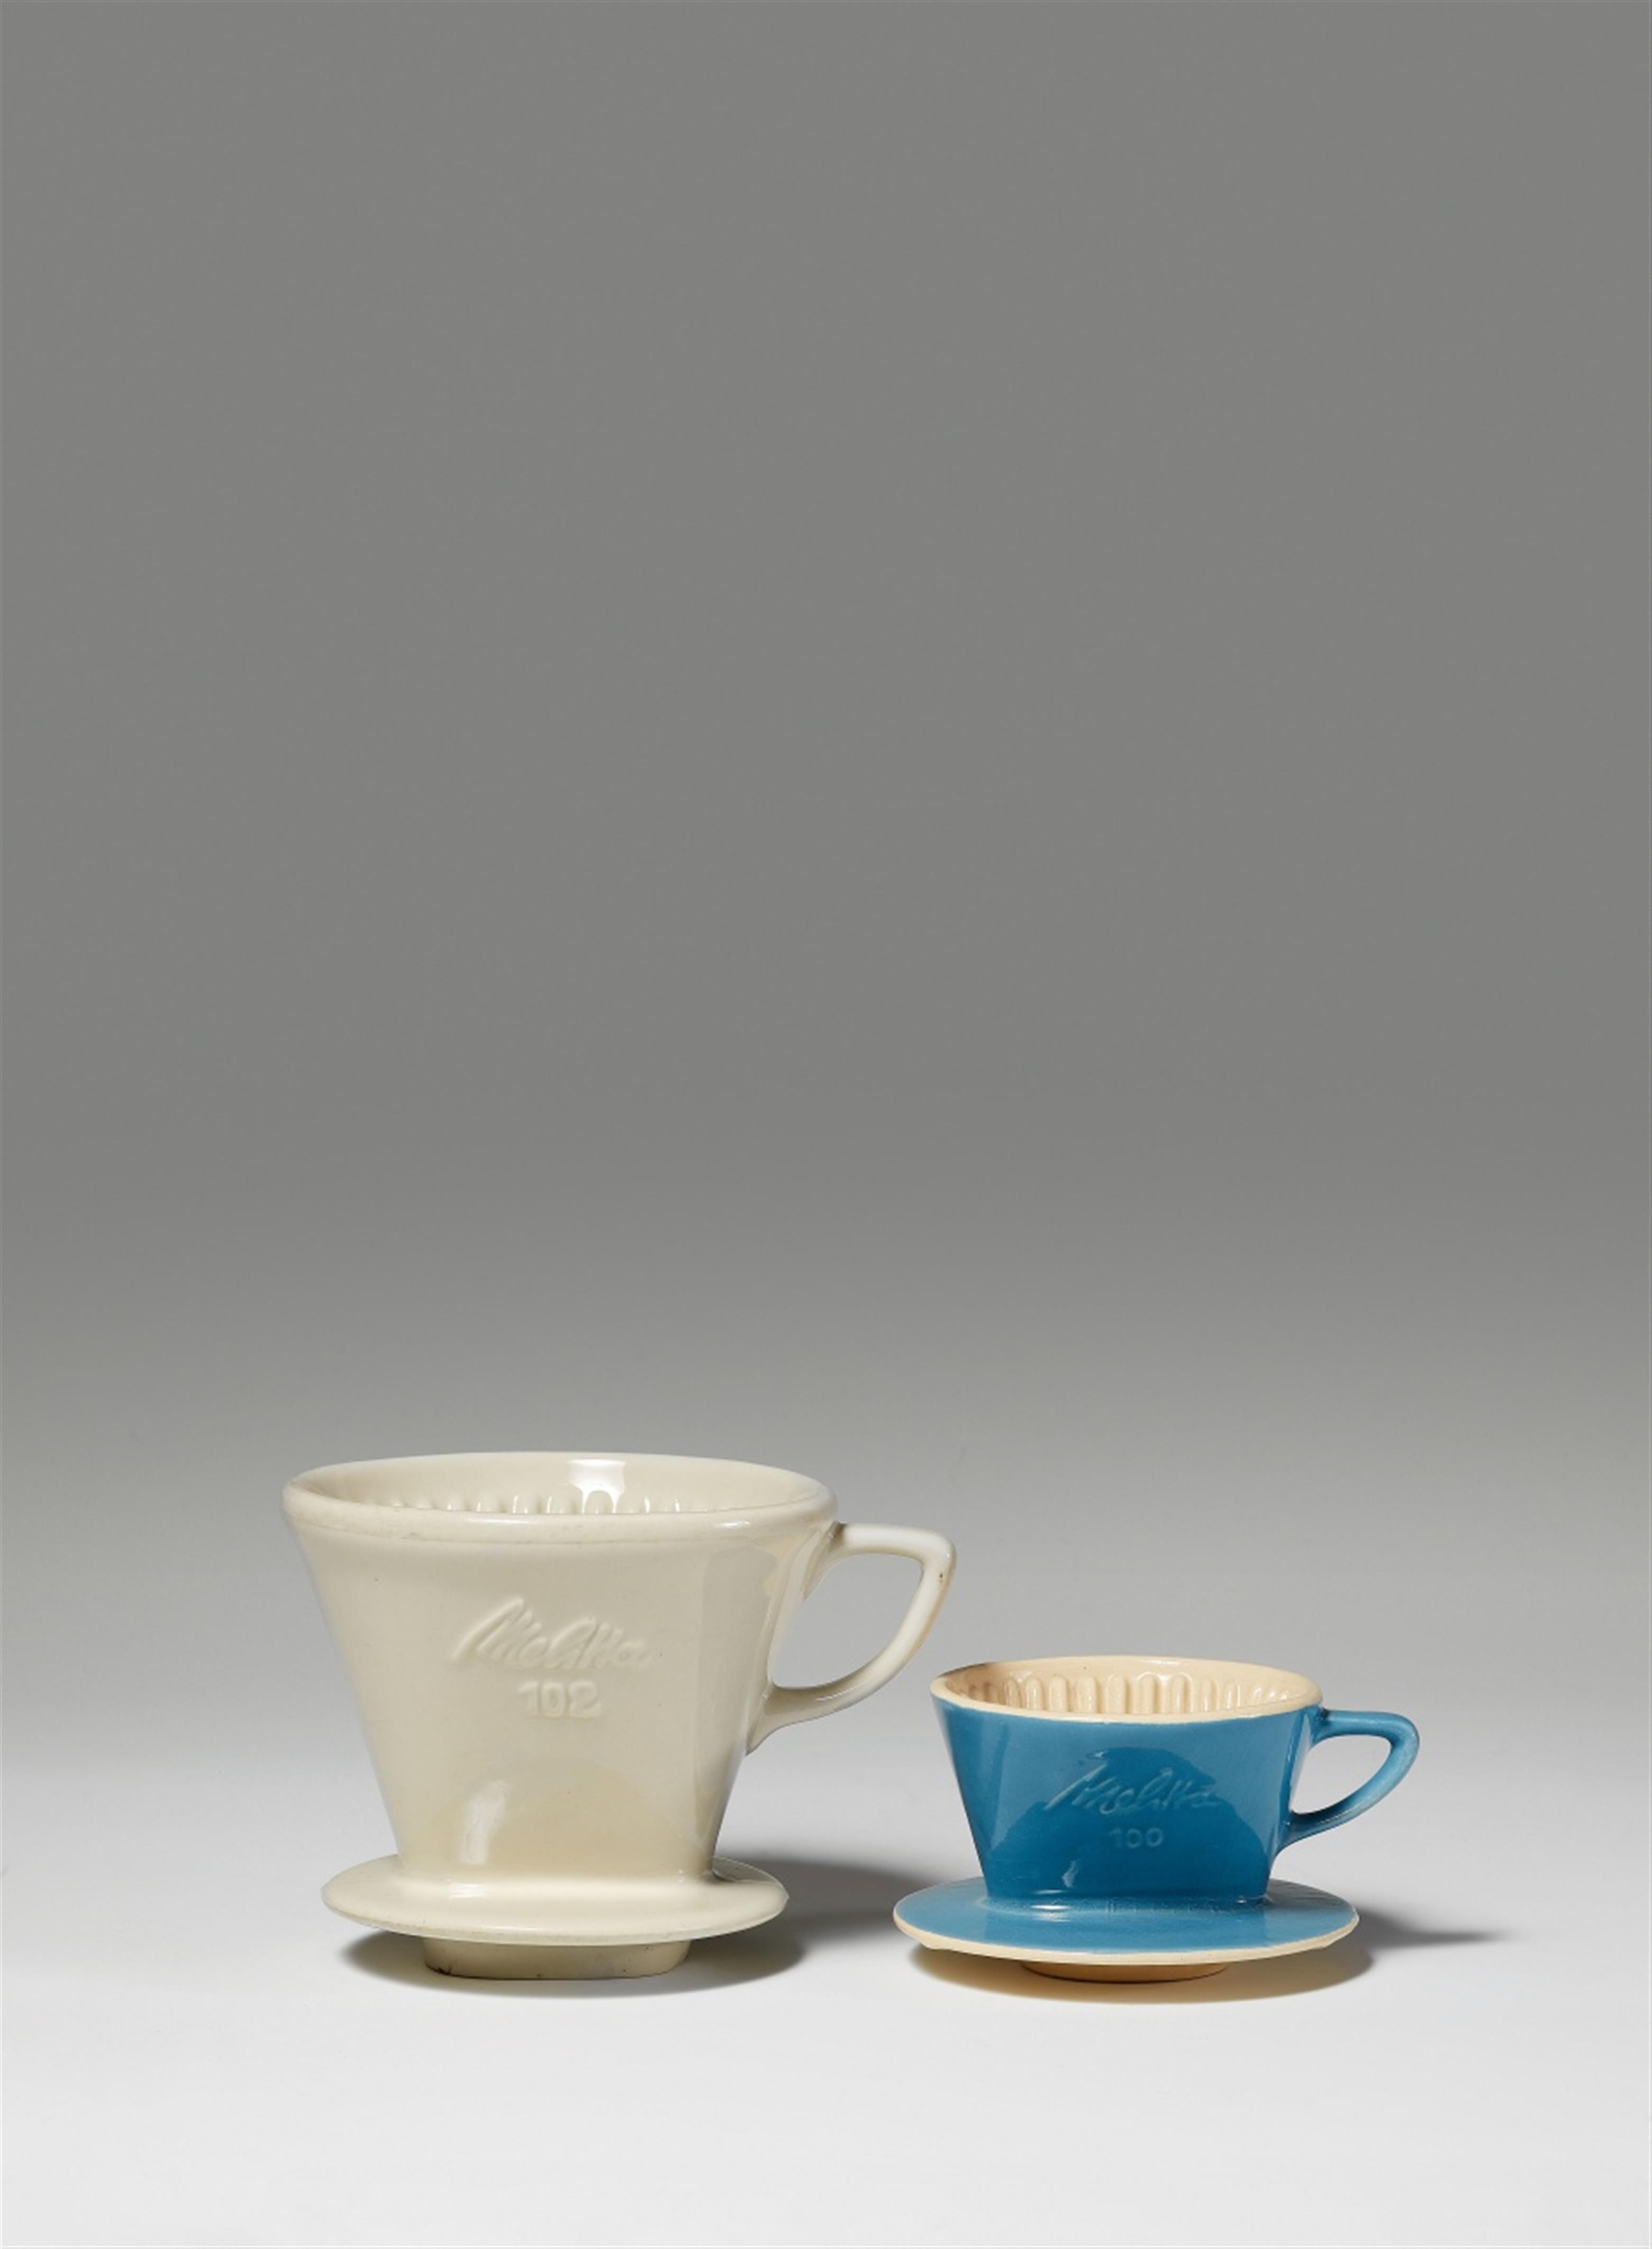 Two cup-shaped Melitta porcelain coffee filters - image-1